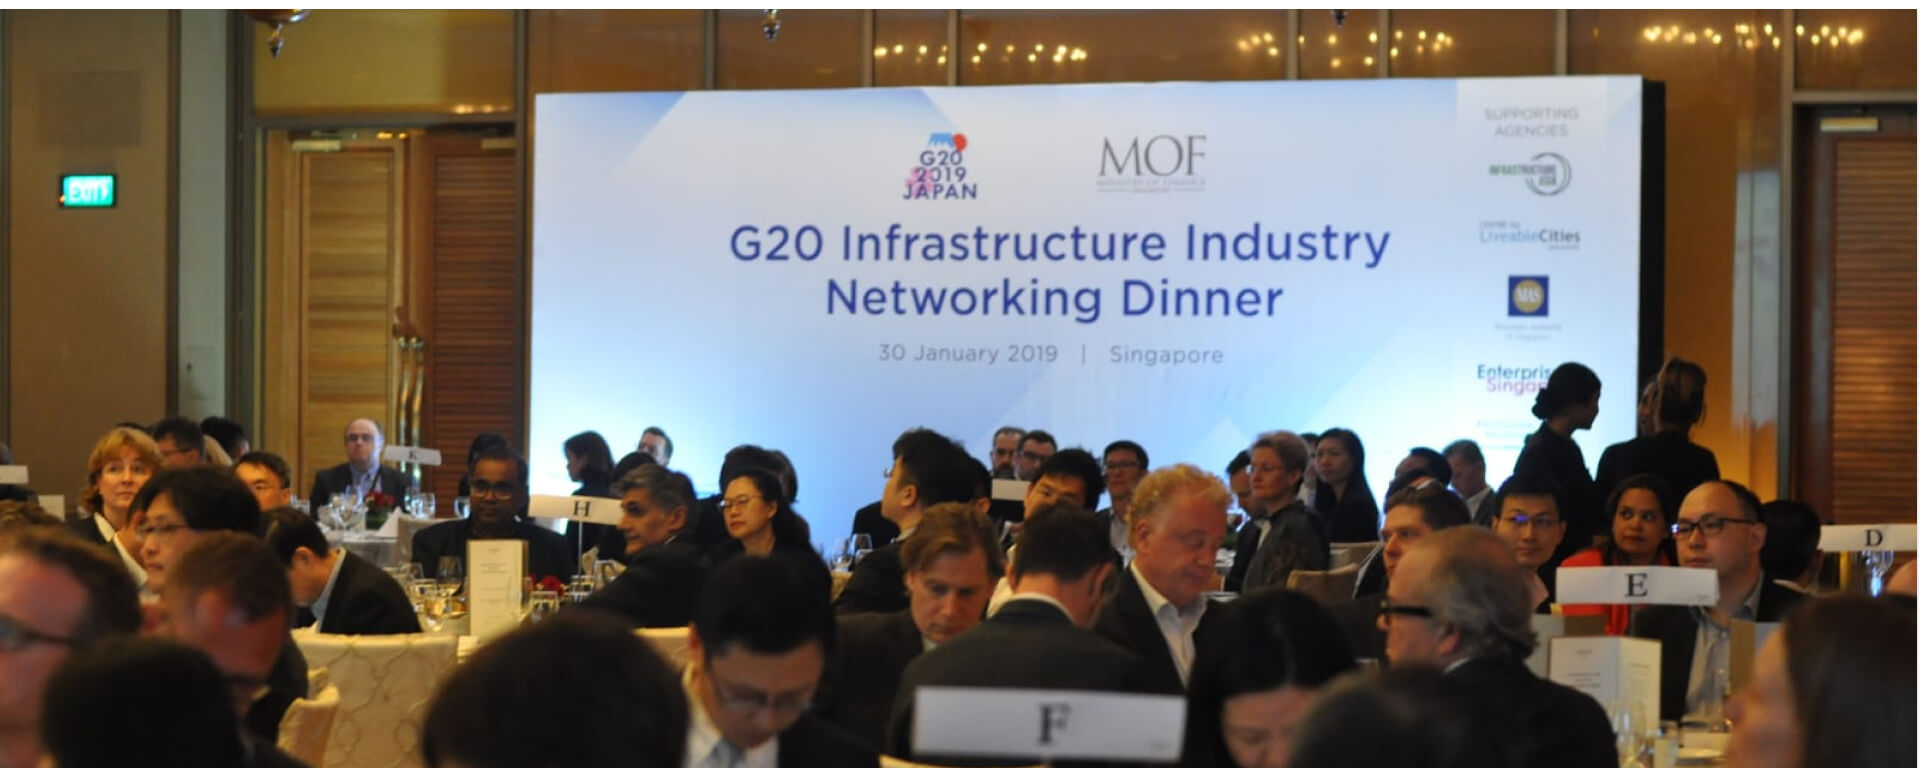 G20 Infrastructure Industry Networking Dinner